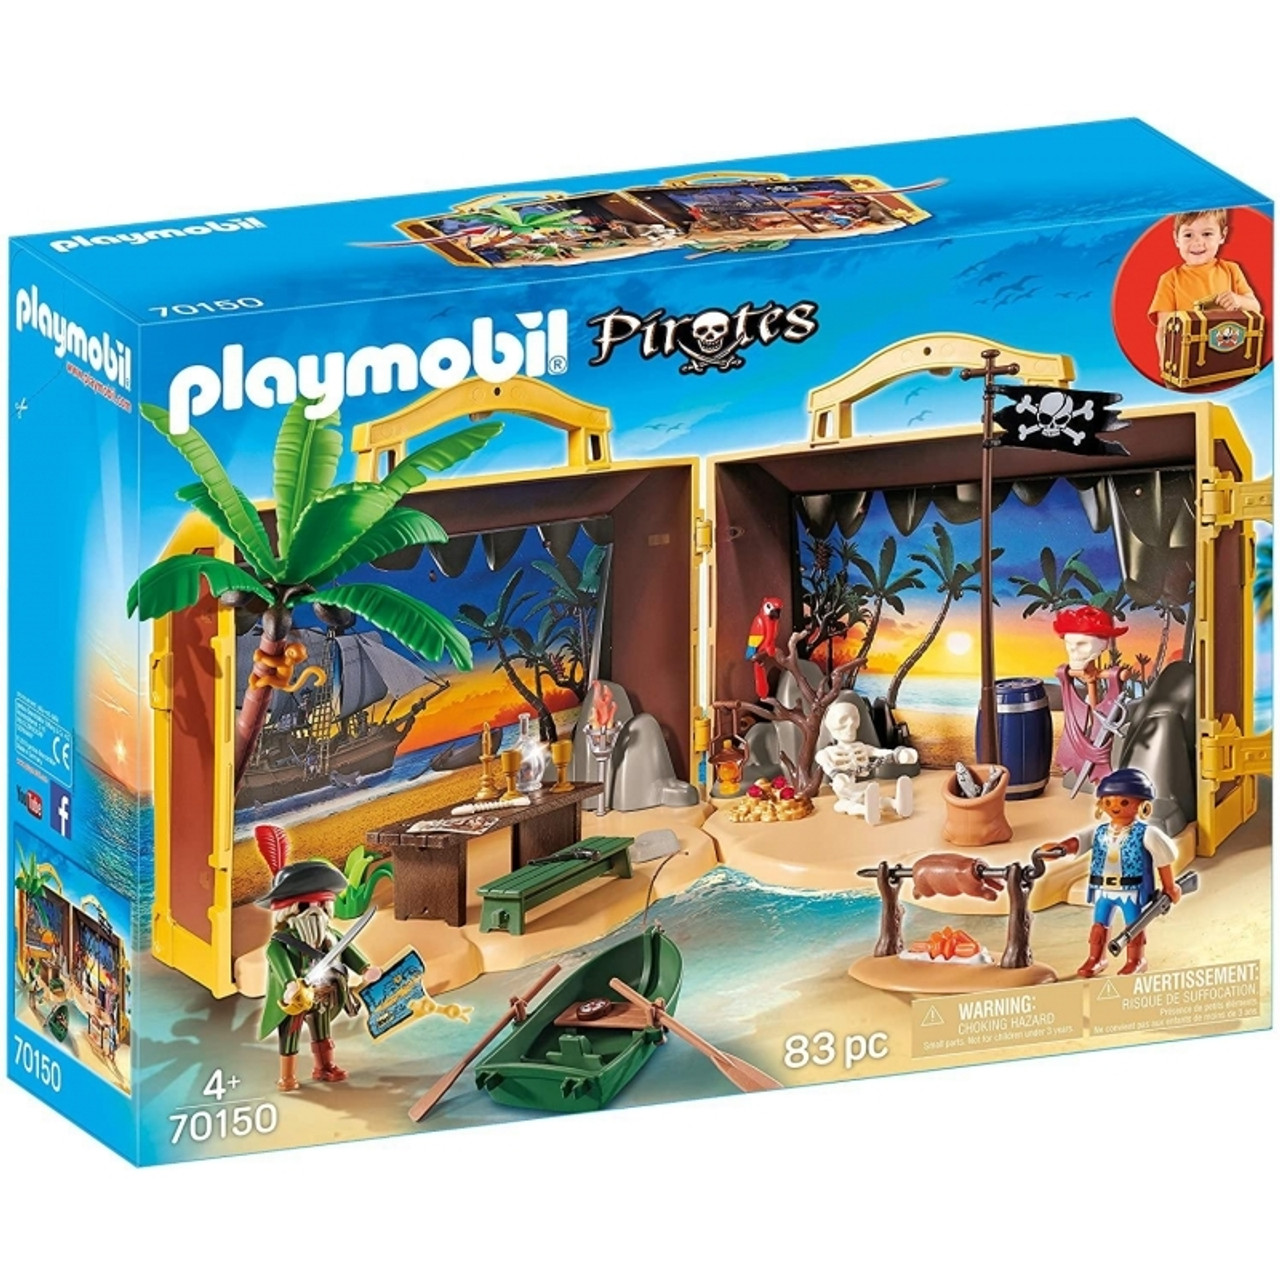 ma COLLECTION playmobil XXL (unboxing playmobil pirate) 